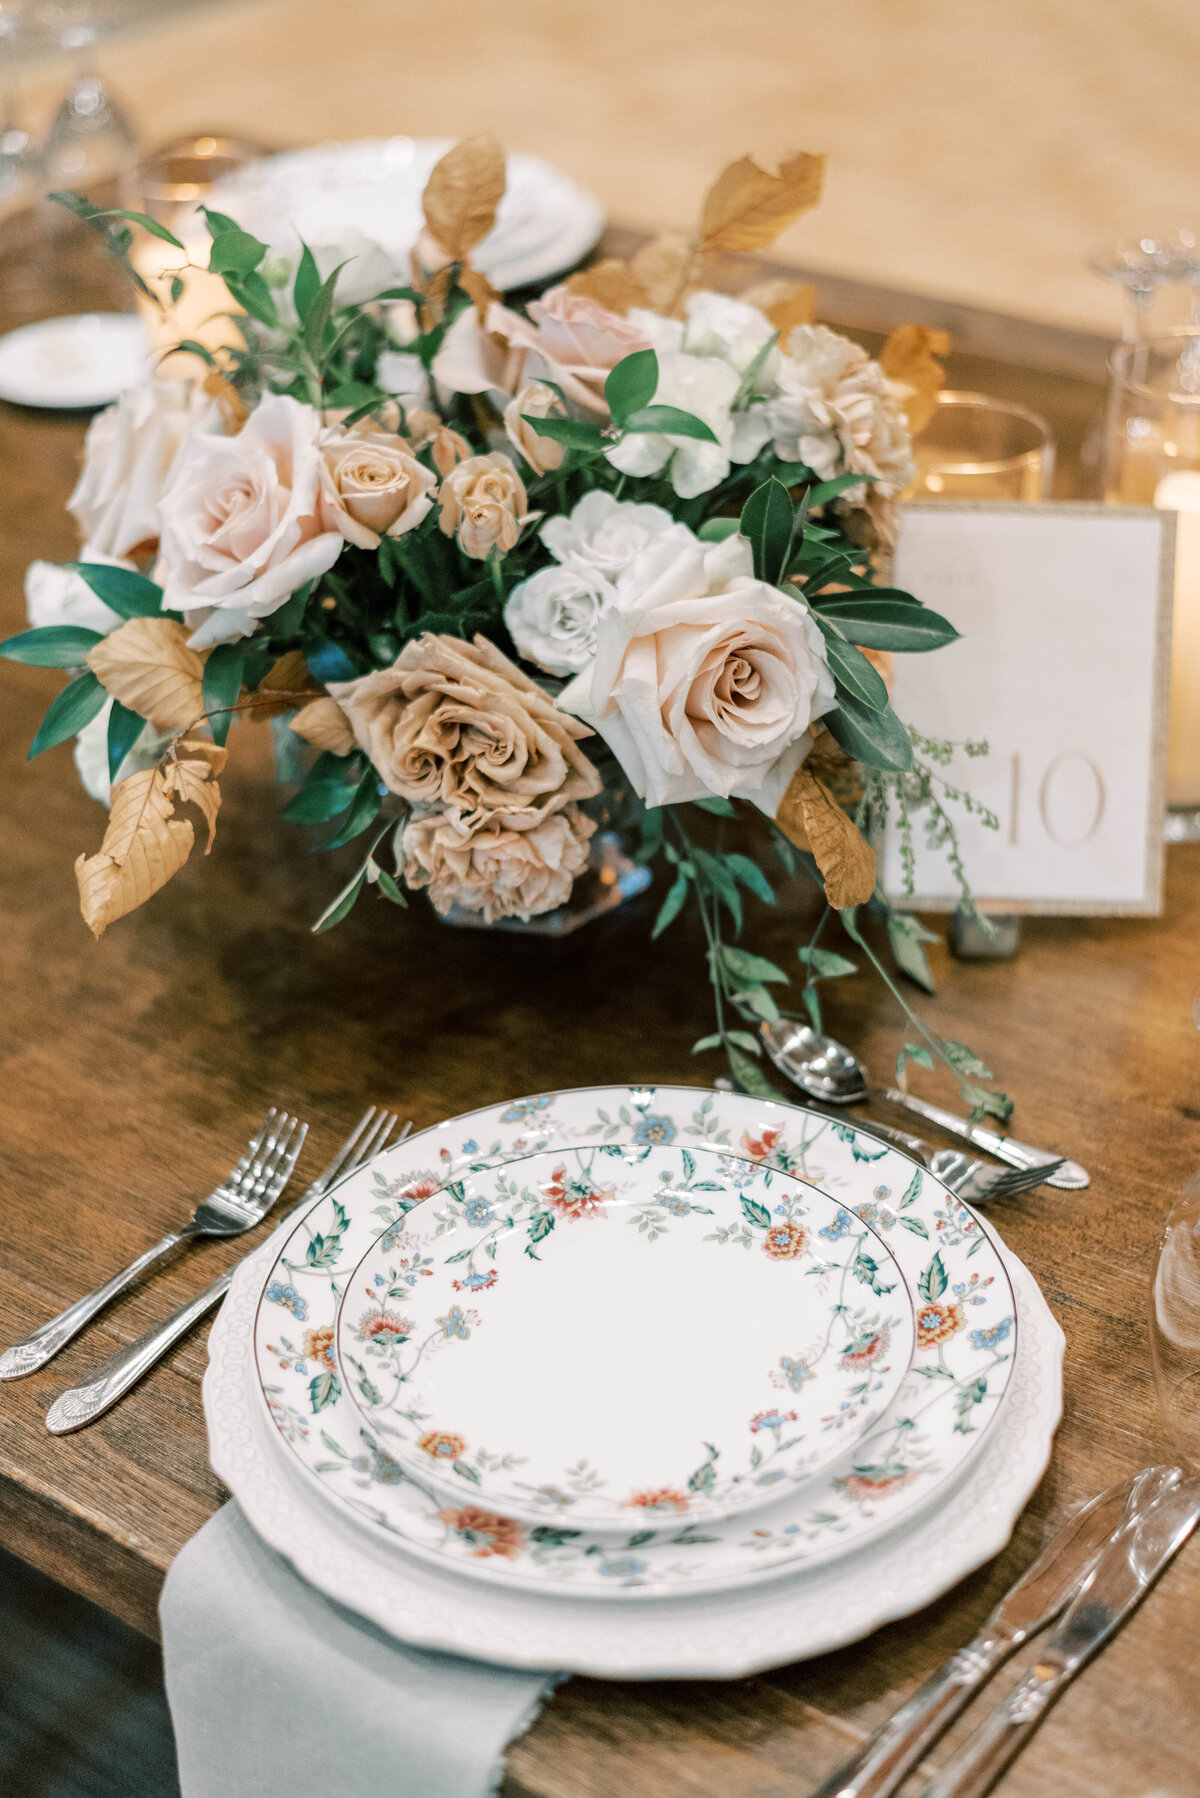 Wedding reception table setting on wooden tables with floral dinnerware and neutral colored floral centerpieces